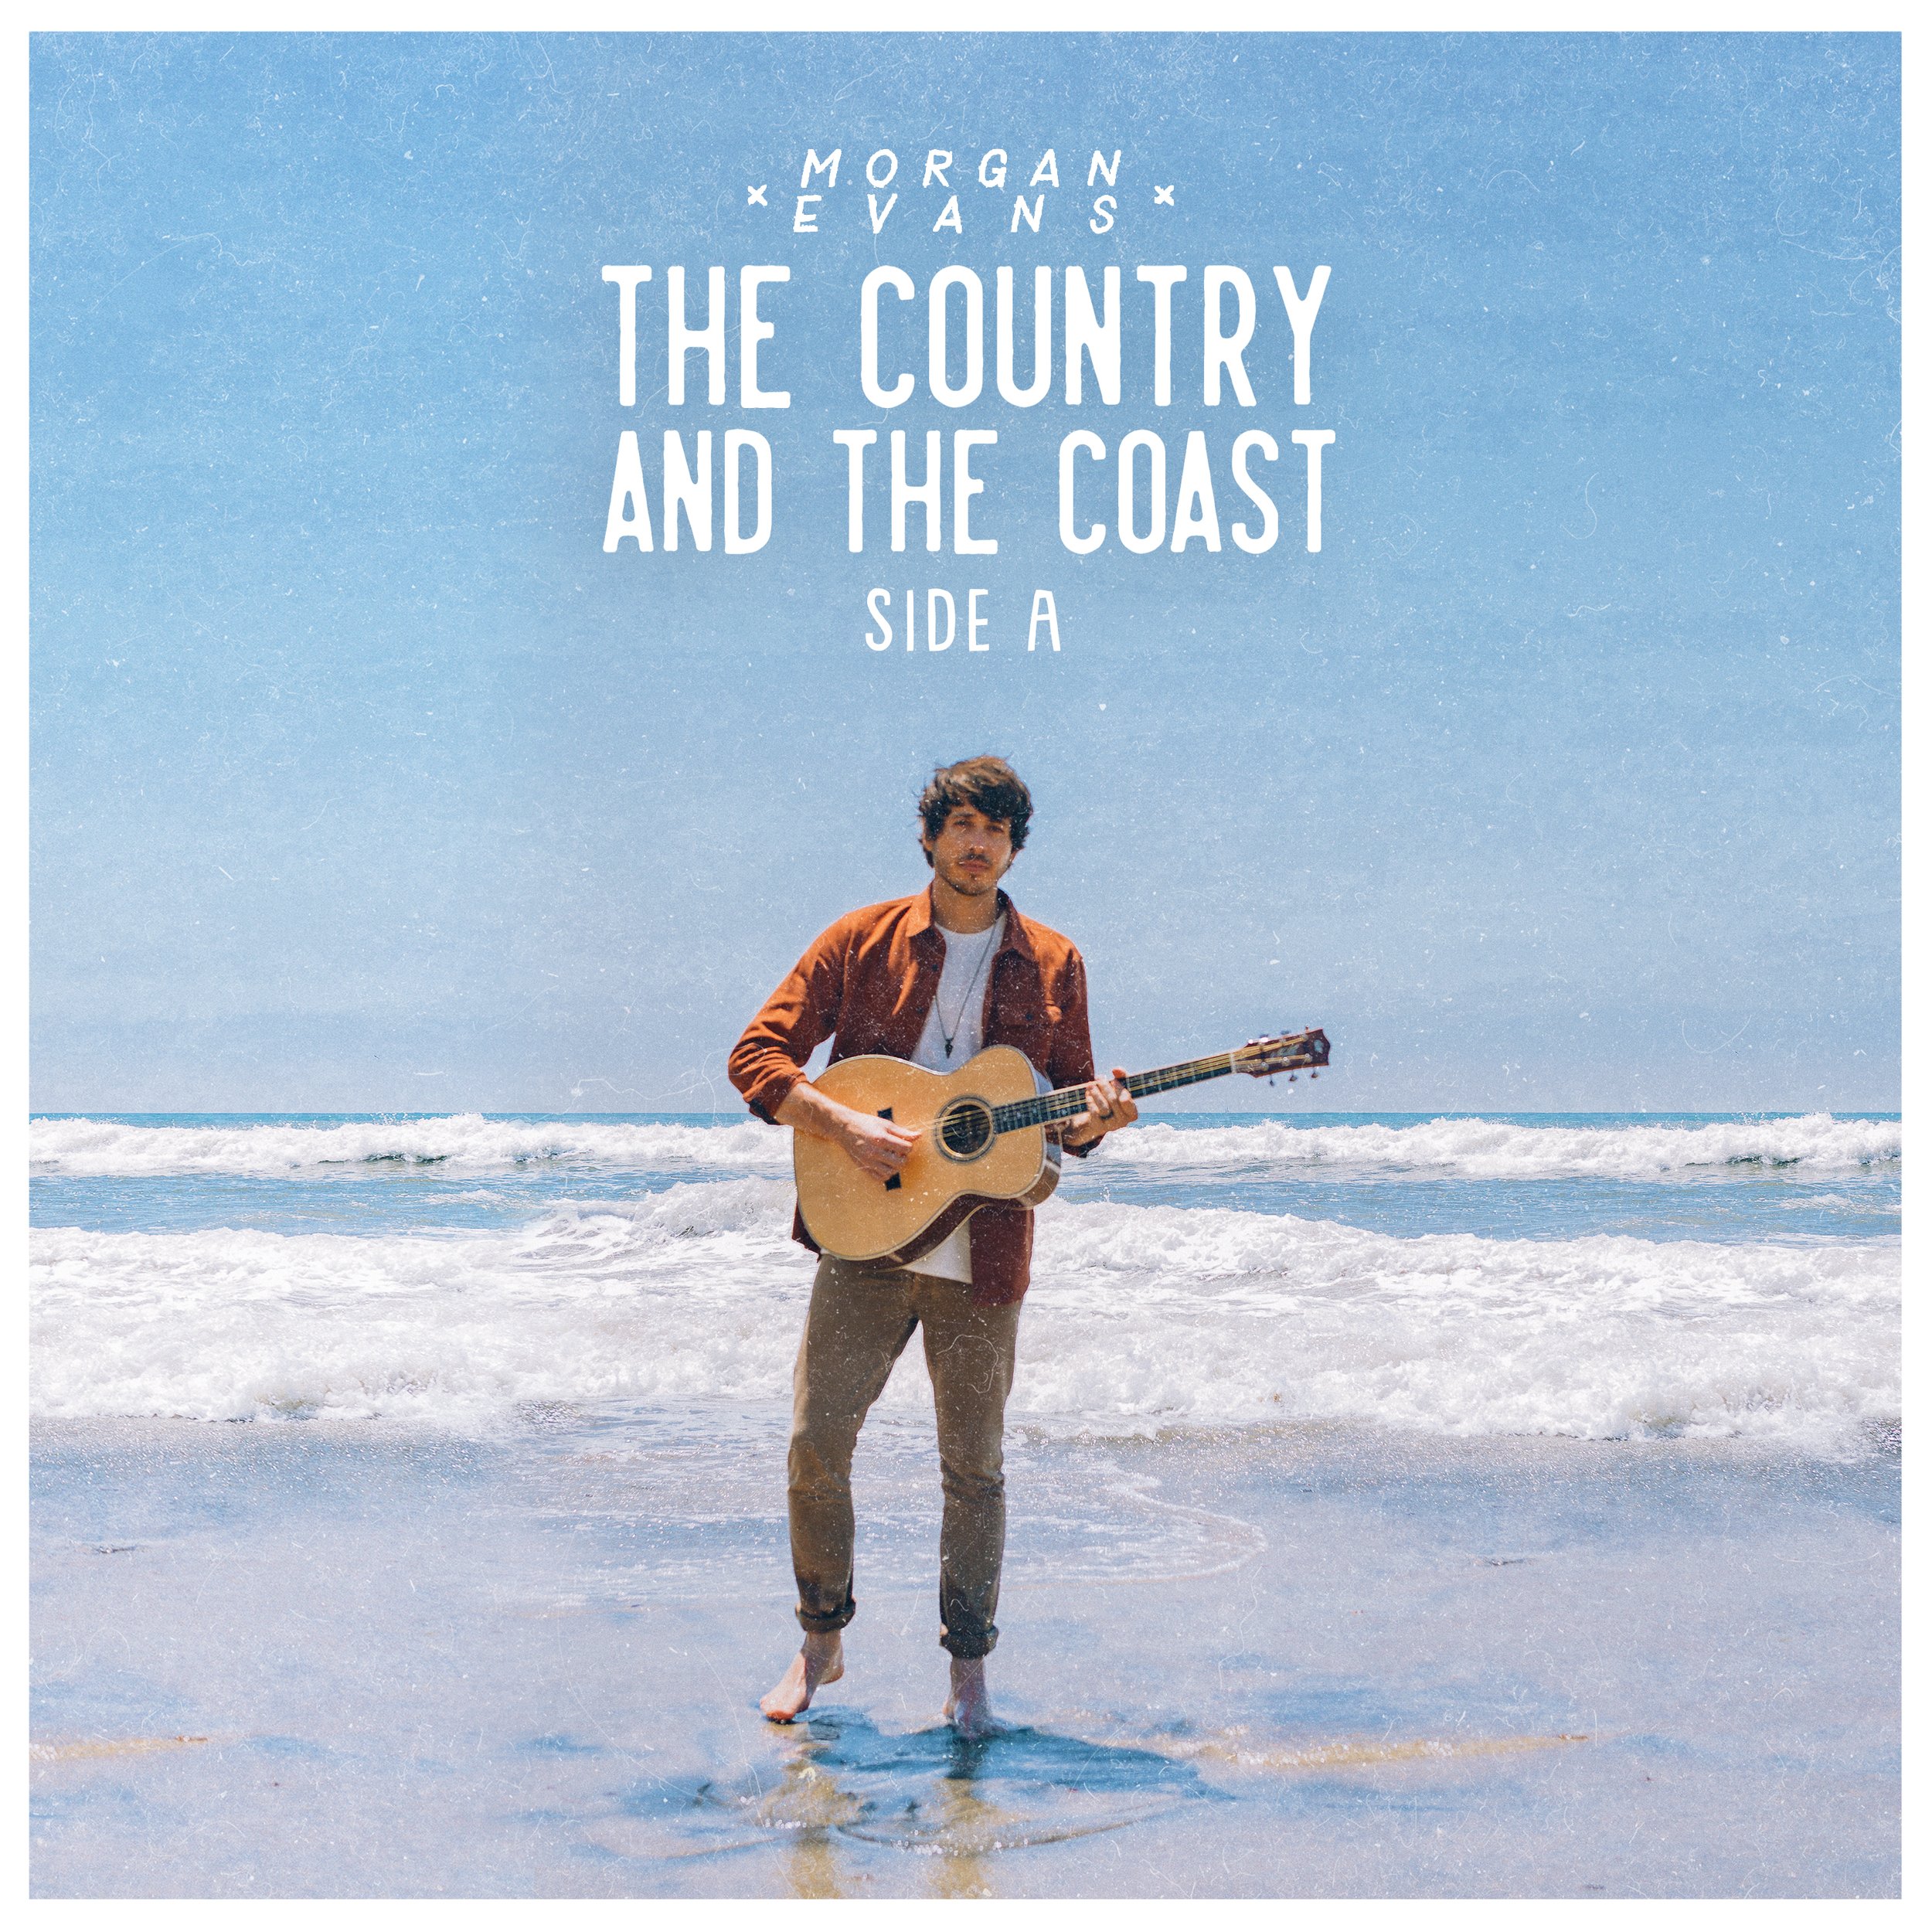 Morgan Evans - The Country And The Coast [Dolby Atmos]